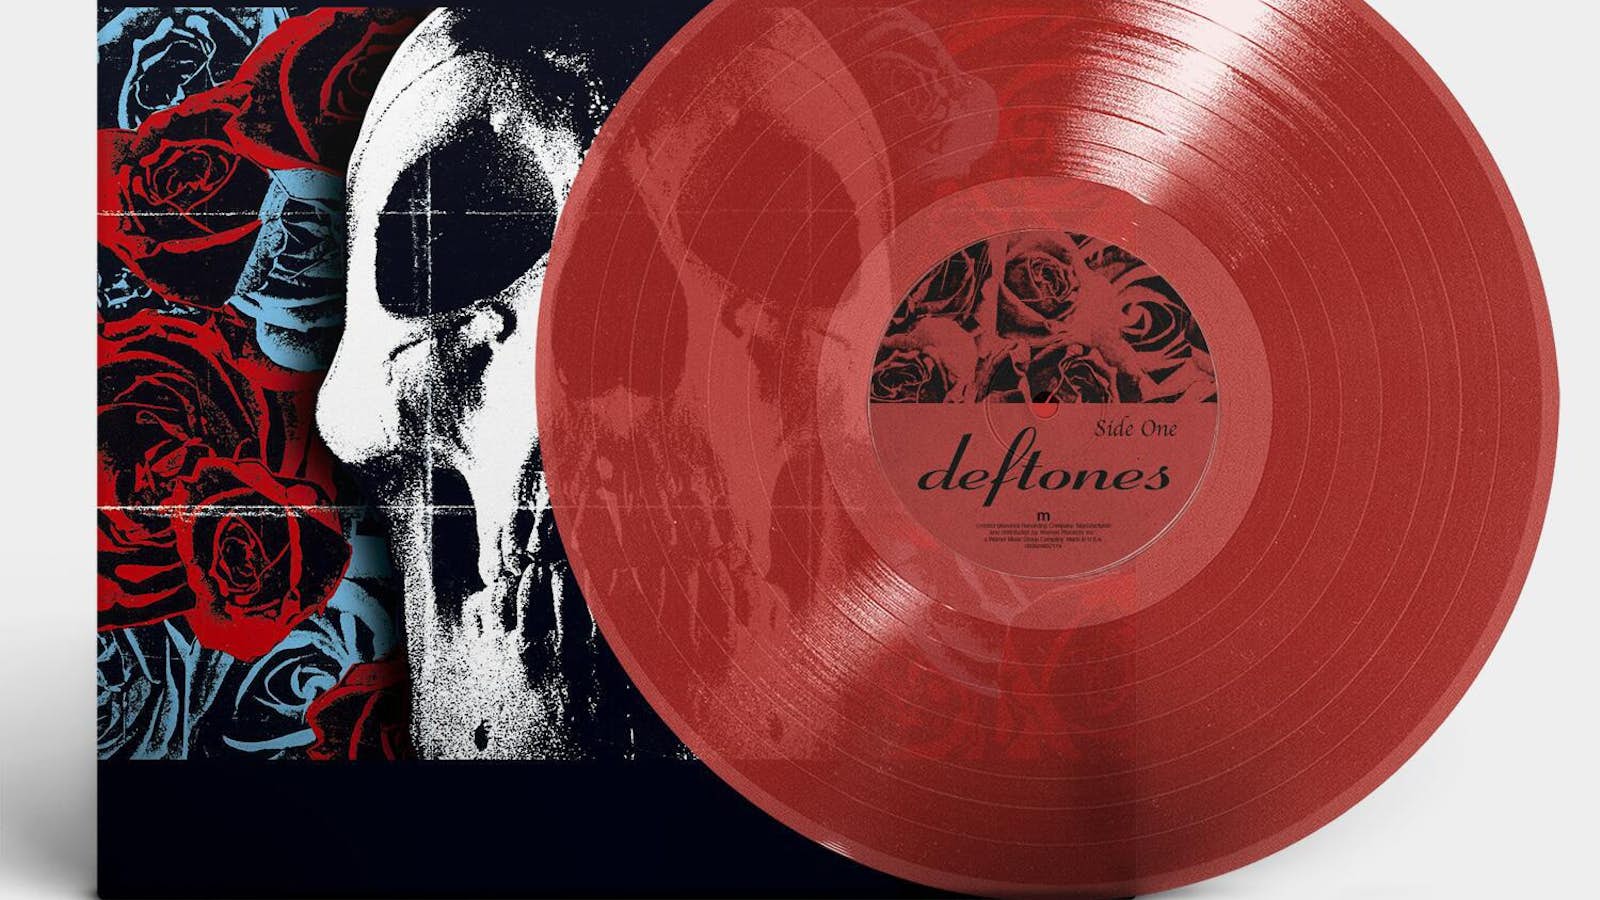 Deftones S/T (Limited/Anniversary Edition/Red) Vinyl Record